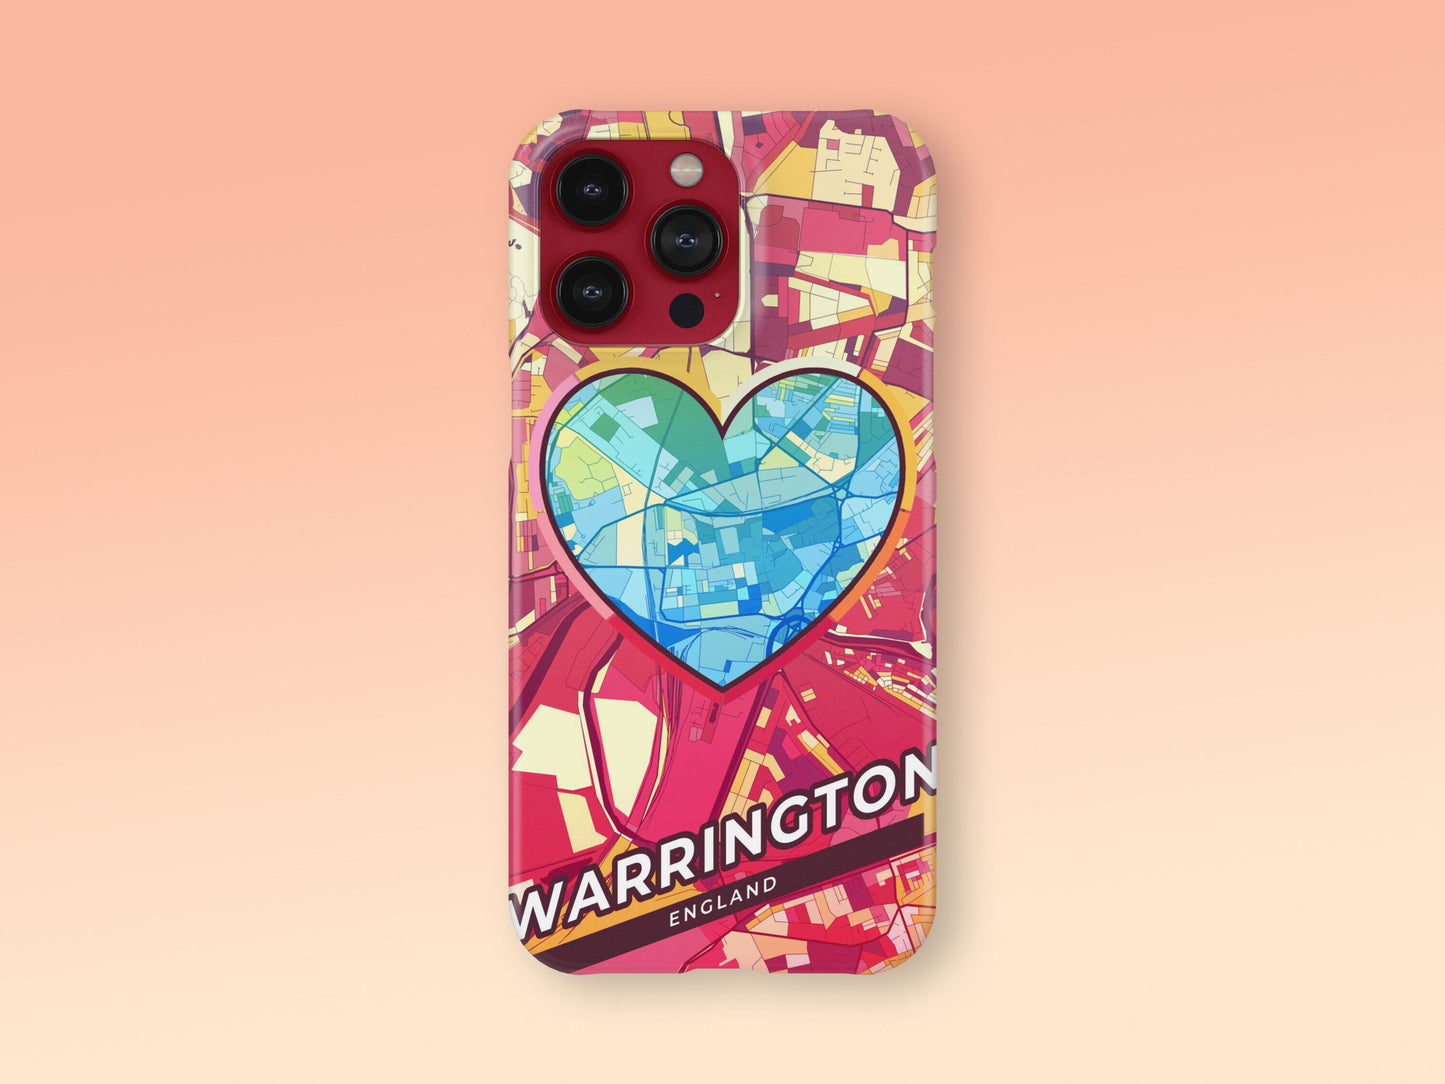 Warrington England slim phone case with colorful icon 2